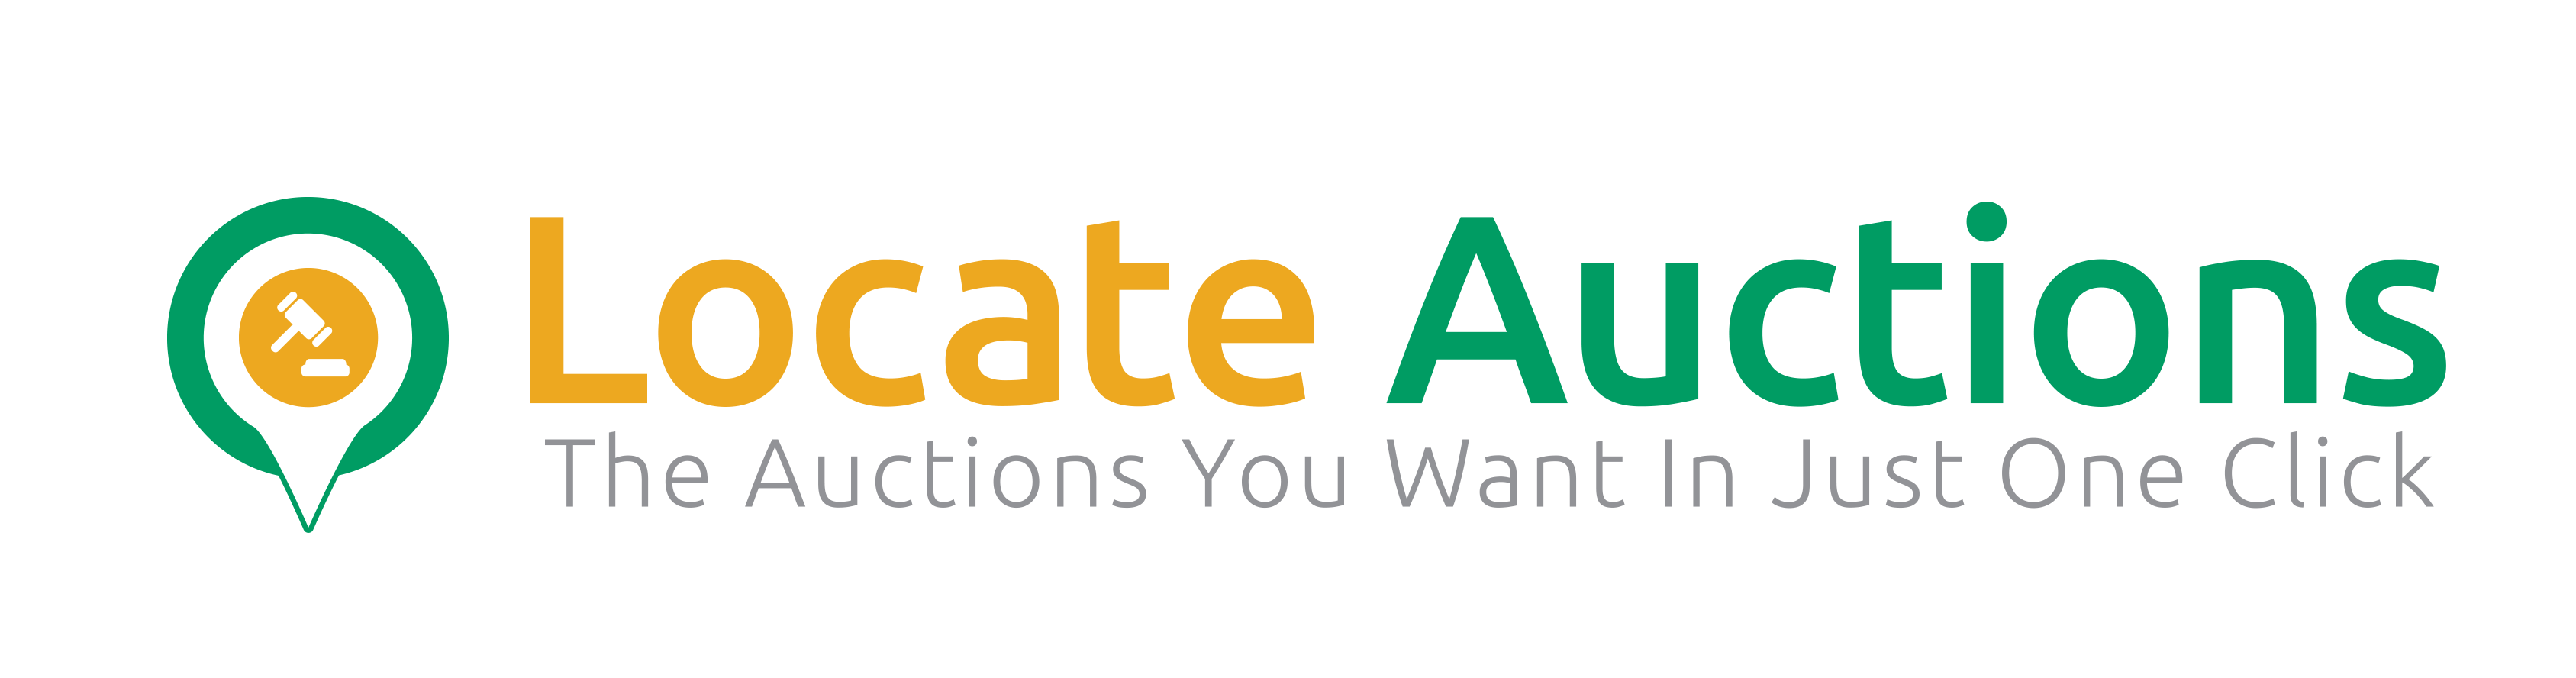 Police Auctions State Auction Directory - Public Auctions